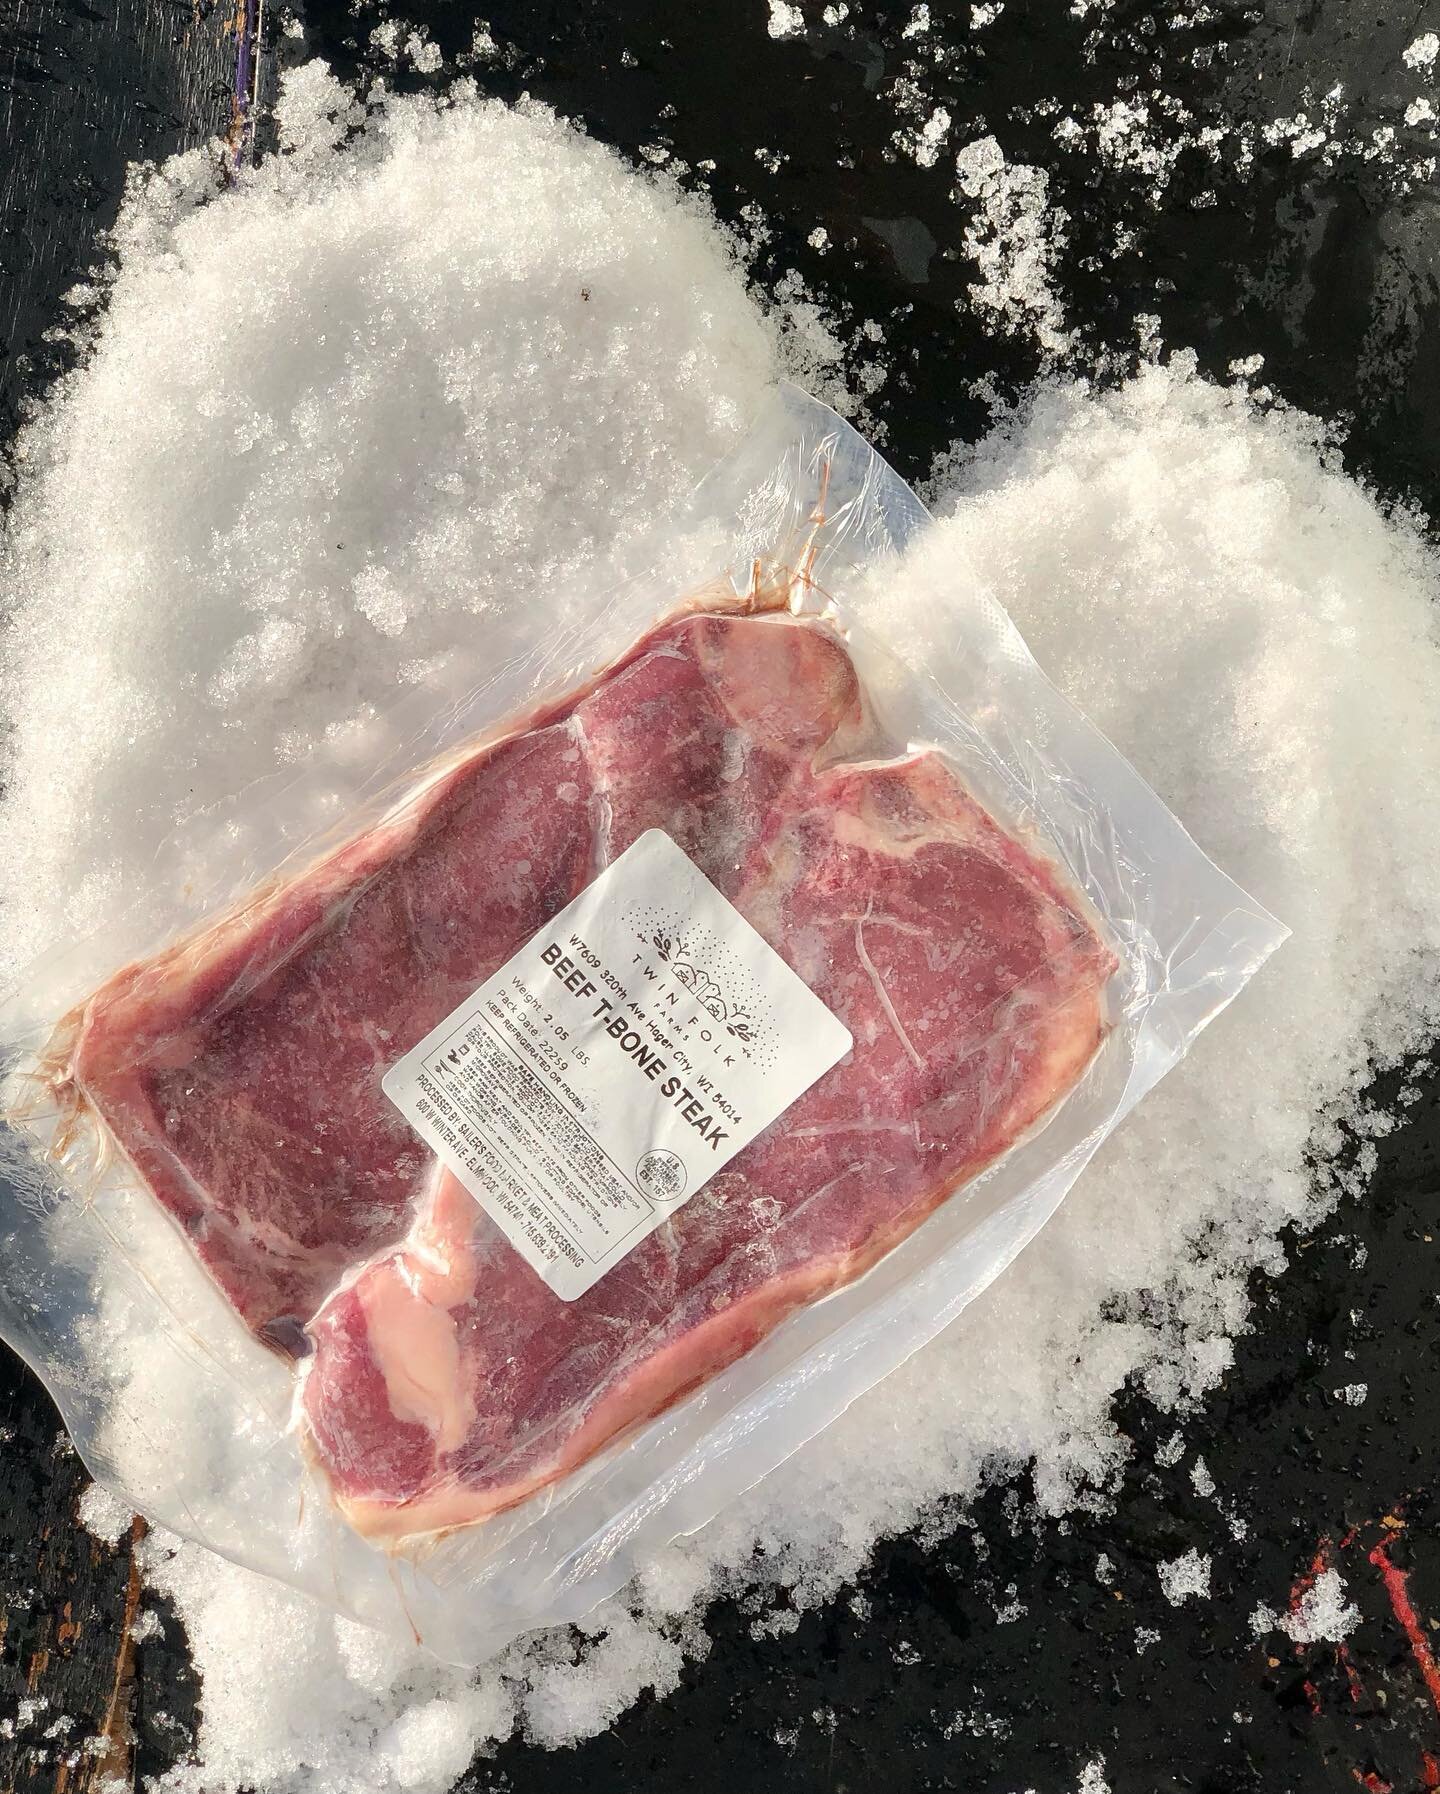 🥩 Juicy steaks and hearty Valentine snow. ❄️ 
I put together three steak/chop specials for this week, and these photos turned out so cute (or so I thought 🥰).
If I were to give advice on properly prepared steaks/chops, I&rsquo;d say this:
- Bring y